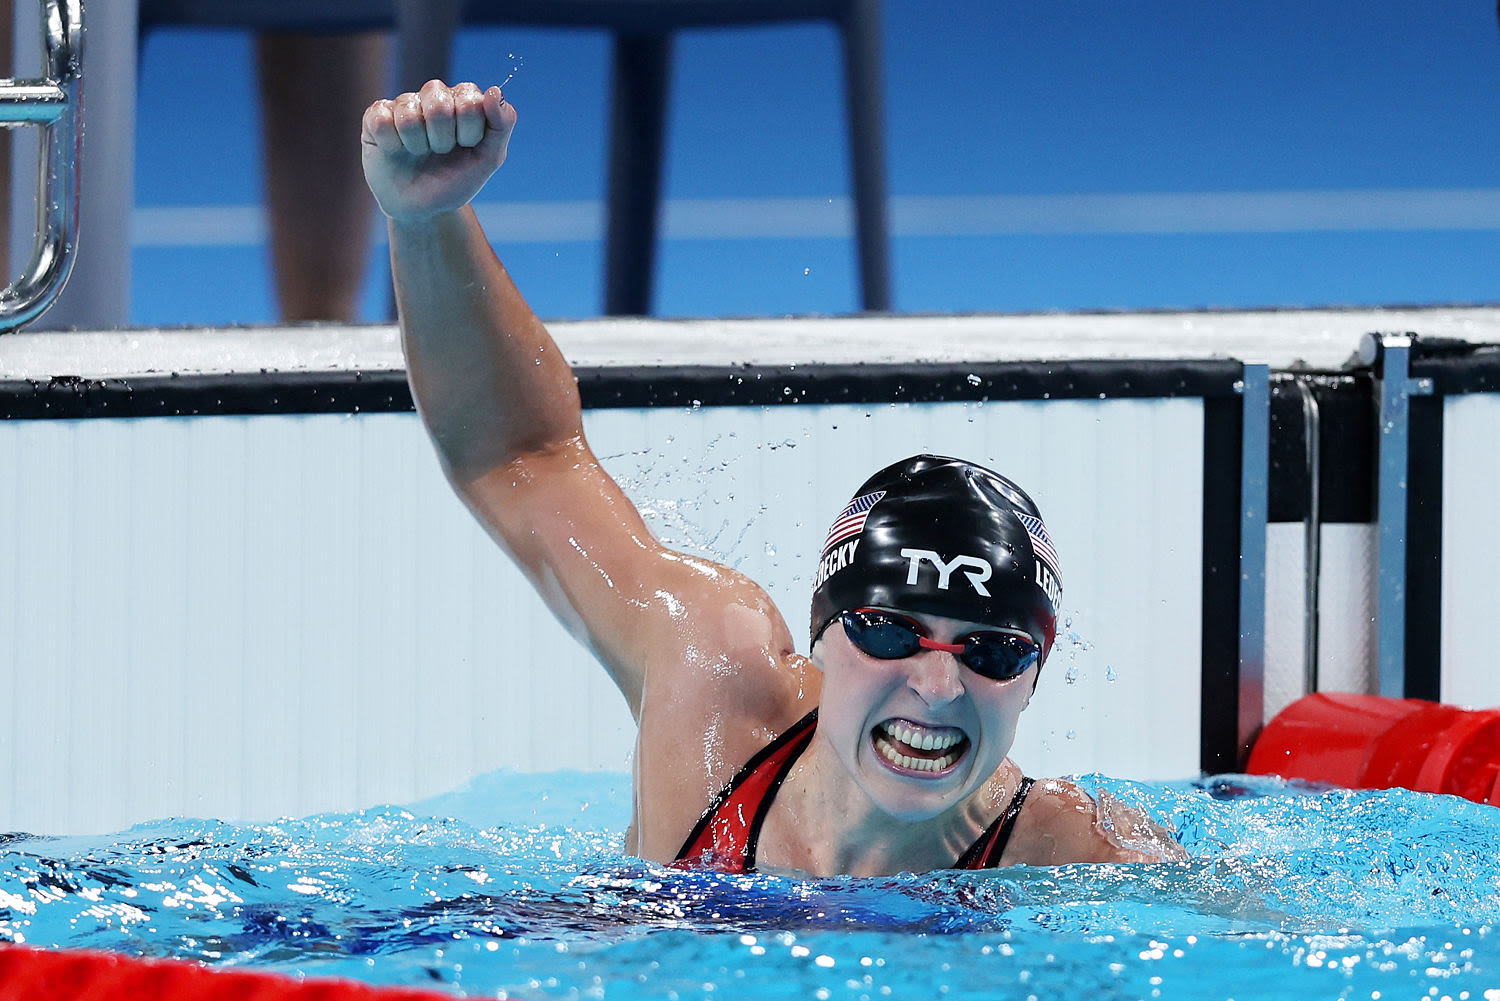 Katie Ledecky wins ninth gold medal, breaks record for most golds by US female swimmer